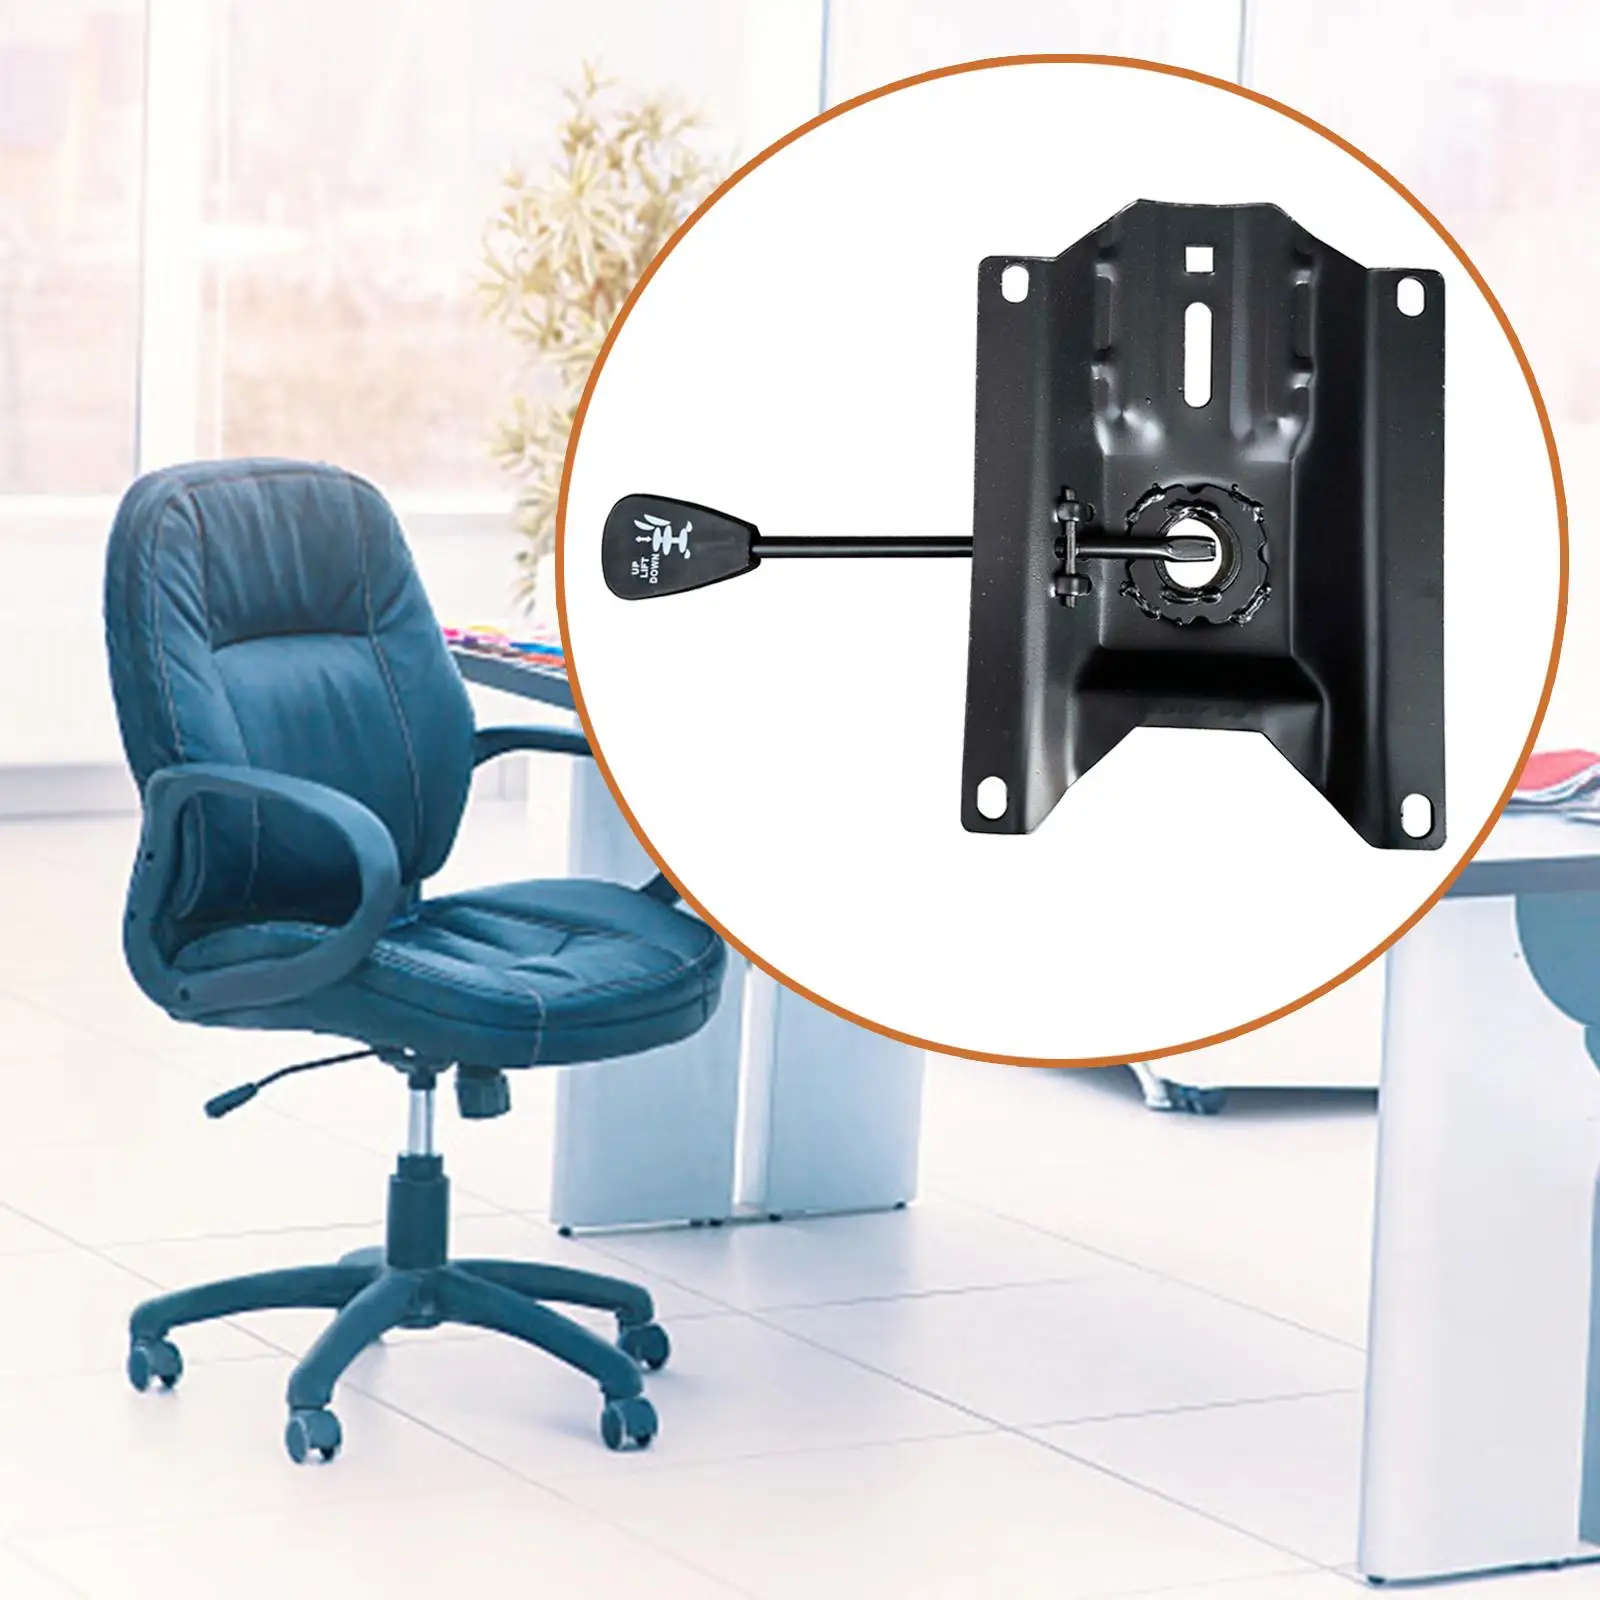 Tilt Control and Gas Lift Adjustable Replacing Swivel Chair Bottom Plate Base task Chair Desk Chair Furniture Gaming Chair